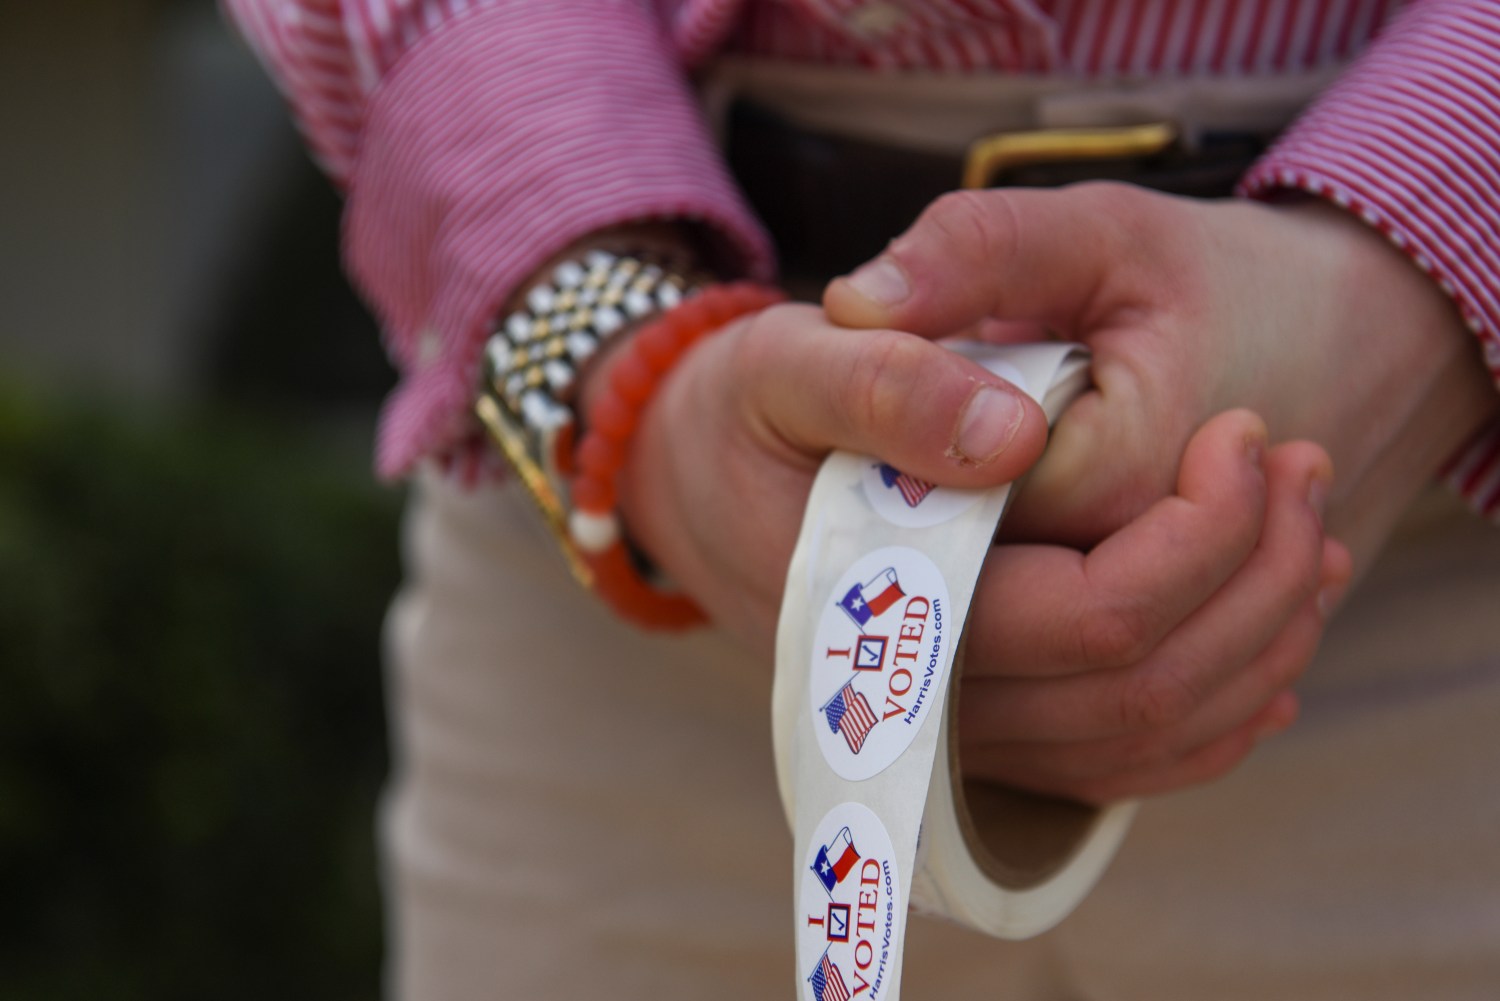 A woman passes out stickers as voters cast their ballot in the Democratic primary election at a polling station in Houston, Texas, U.S. March 3, 2020.  REUTERS/Callaghan O'Hare